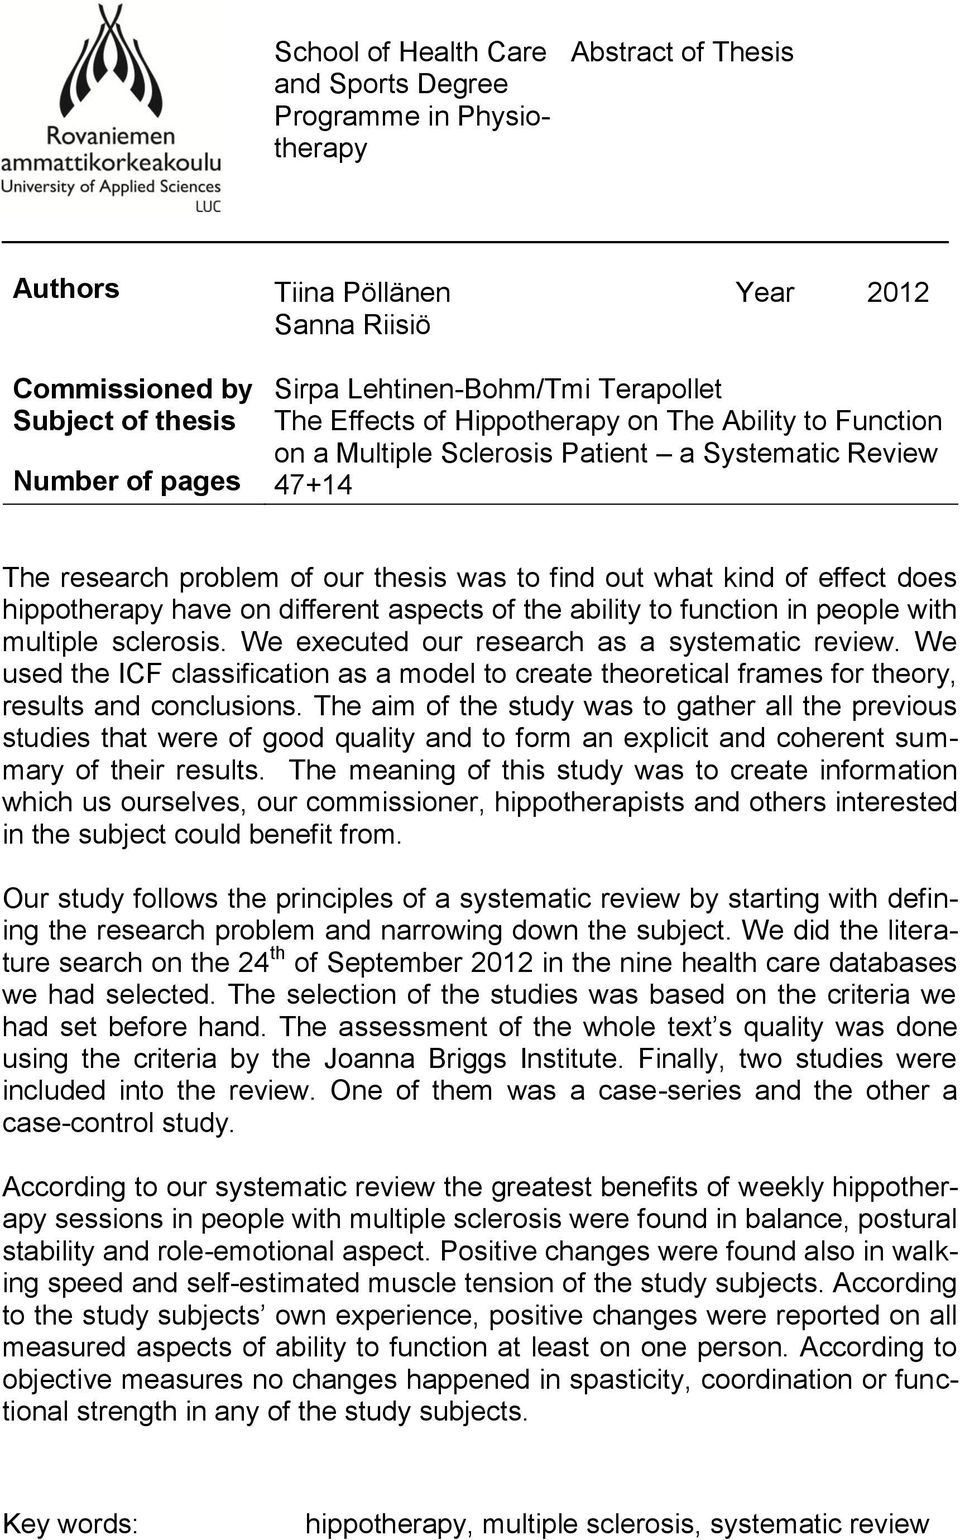 kind of effect does hippotherapy have on different aspects of the ability to function in people with multiple sclerosis. We executed our research as a systematic review.